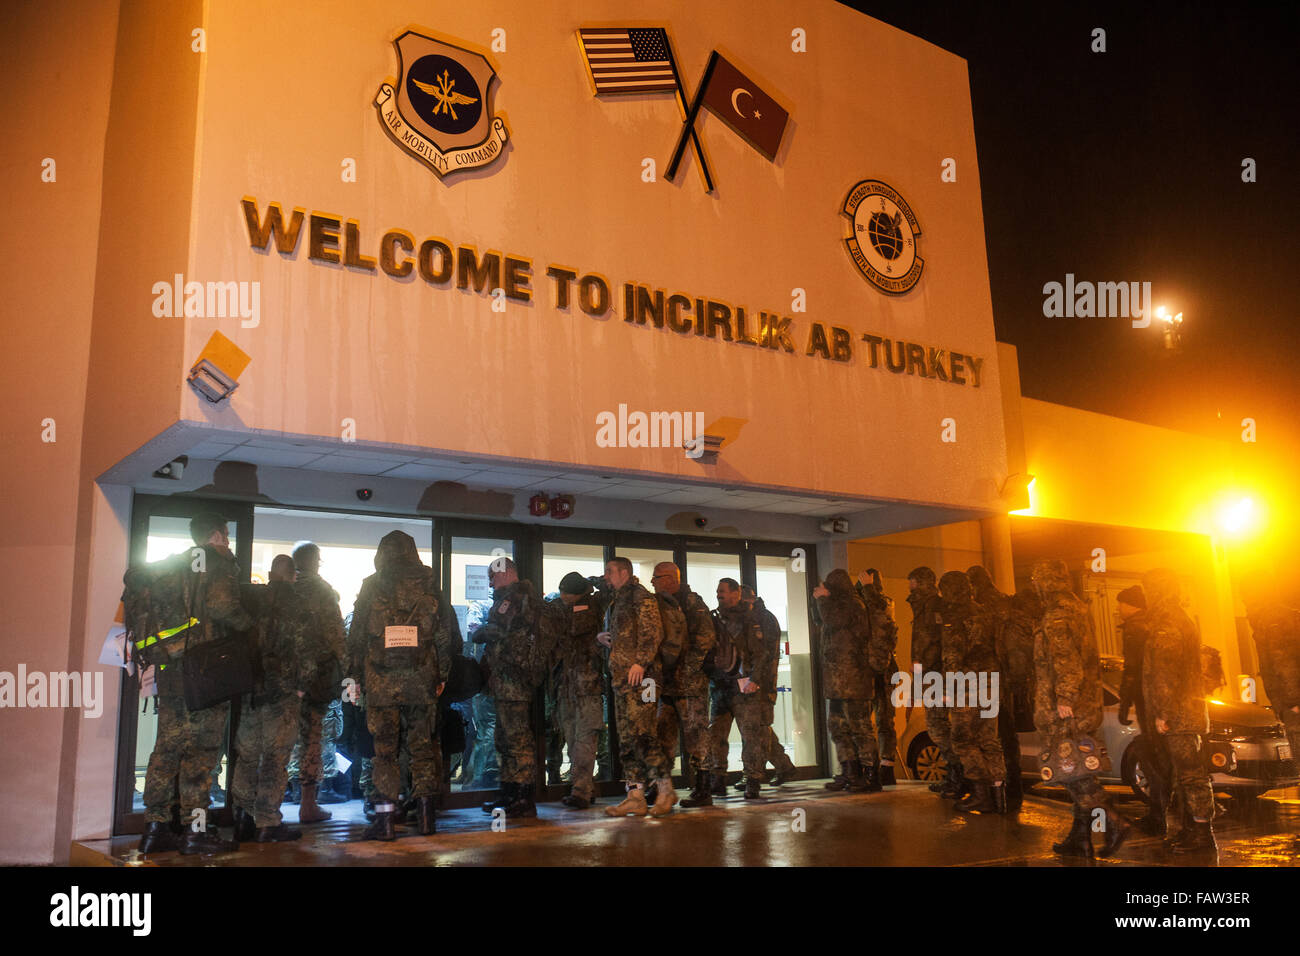 HANDOUT - A handout picture made available by the Bundeswehr (German armed forces) on 05 January 2016 shows the arrival of German soldiers as part of the operation Inherent Resolve, at Incirlik airbase, Turkey, 04 January 2016. Photo: BUNDESWEHR/FALK BAERWALD/dpa (ATTENTION EDITORS: FOR EDITORIAL USE ONLY IN CONNECTION WITH CURRENT REPORTING/ MANDATORY CREDIT: 'BUNDESWEHR/FALK BAERWALD/dpa') Stock Photo